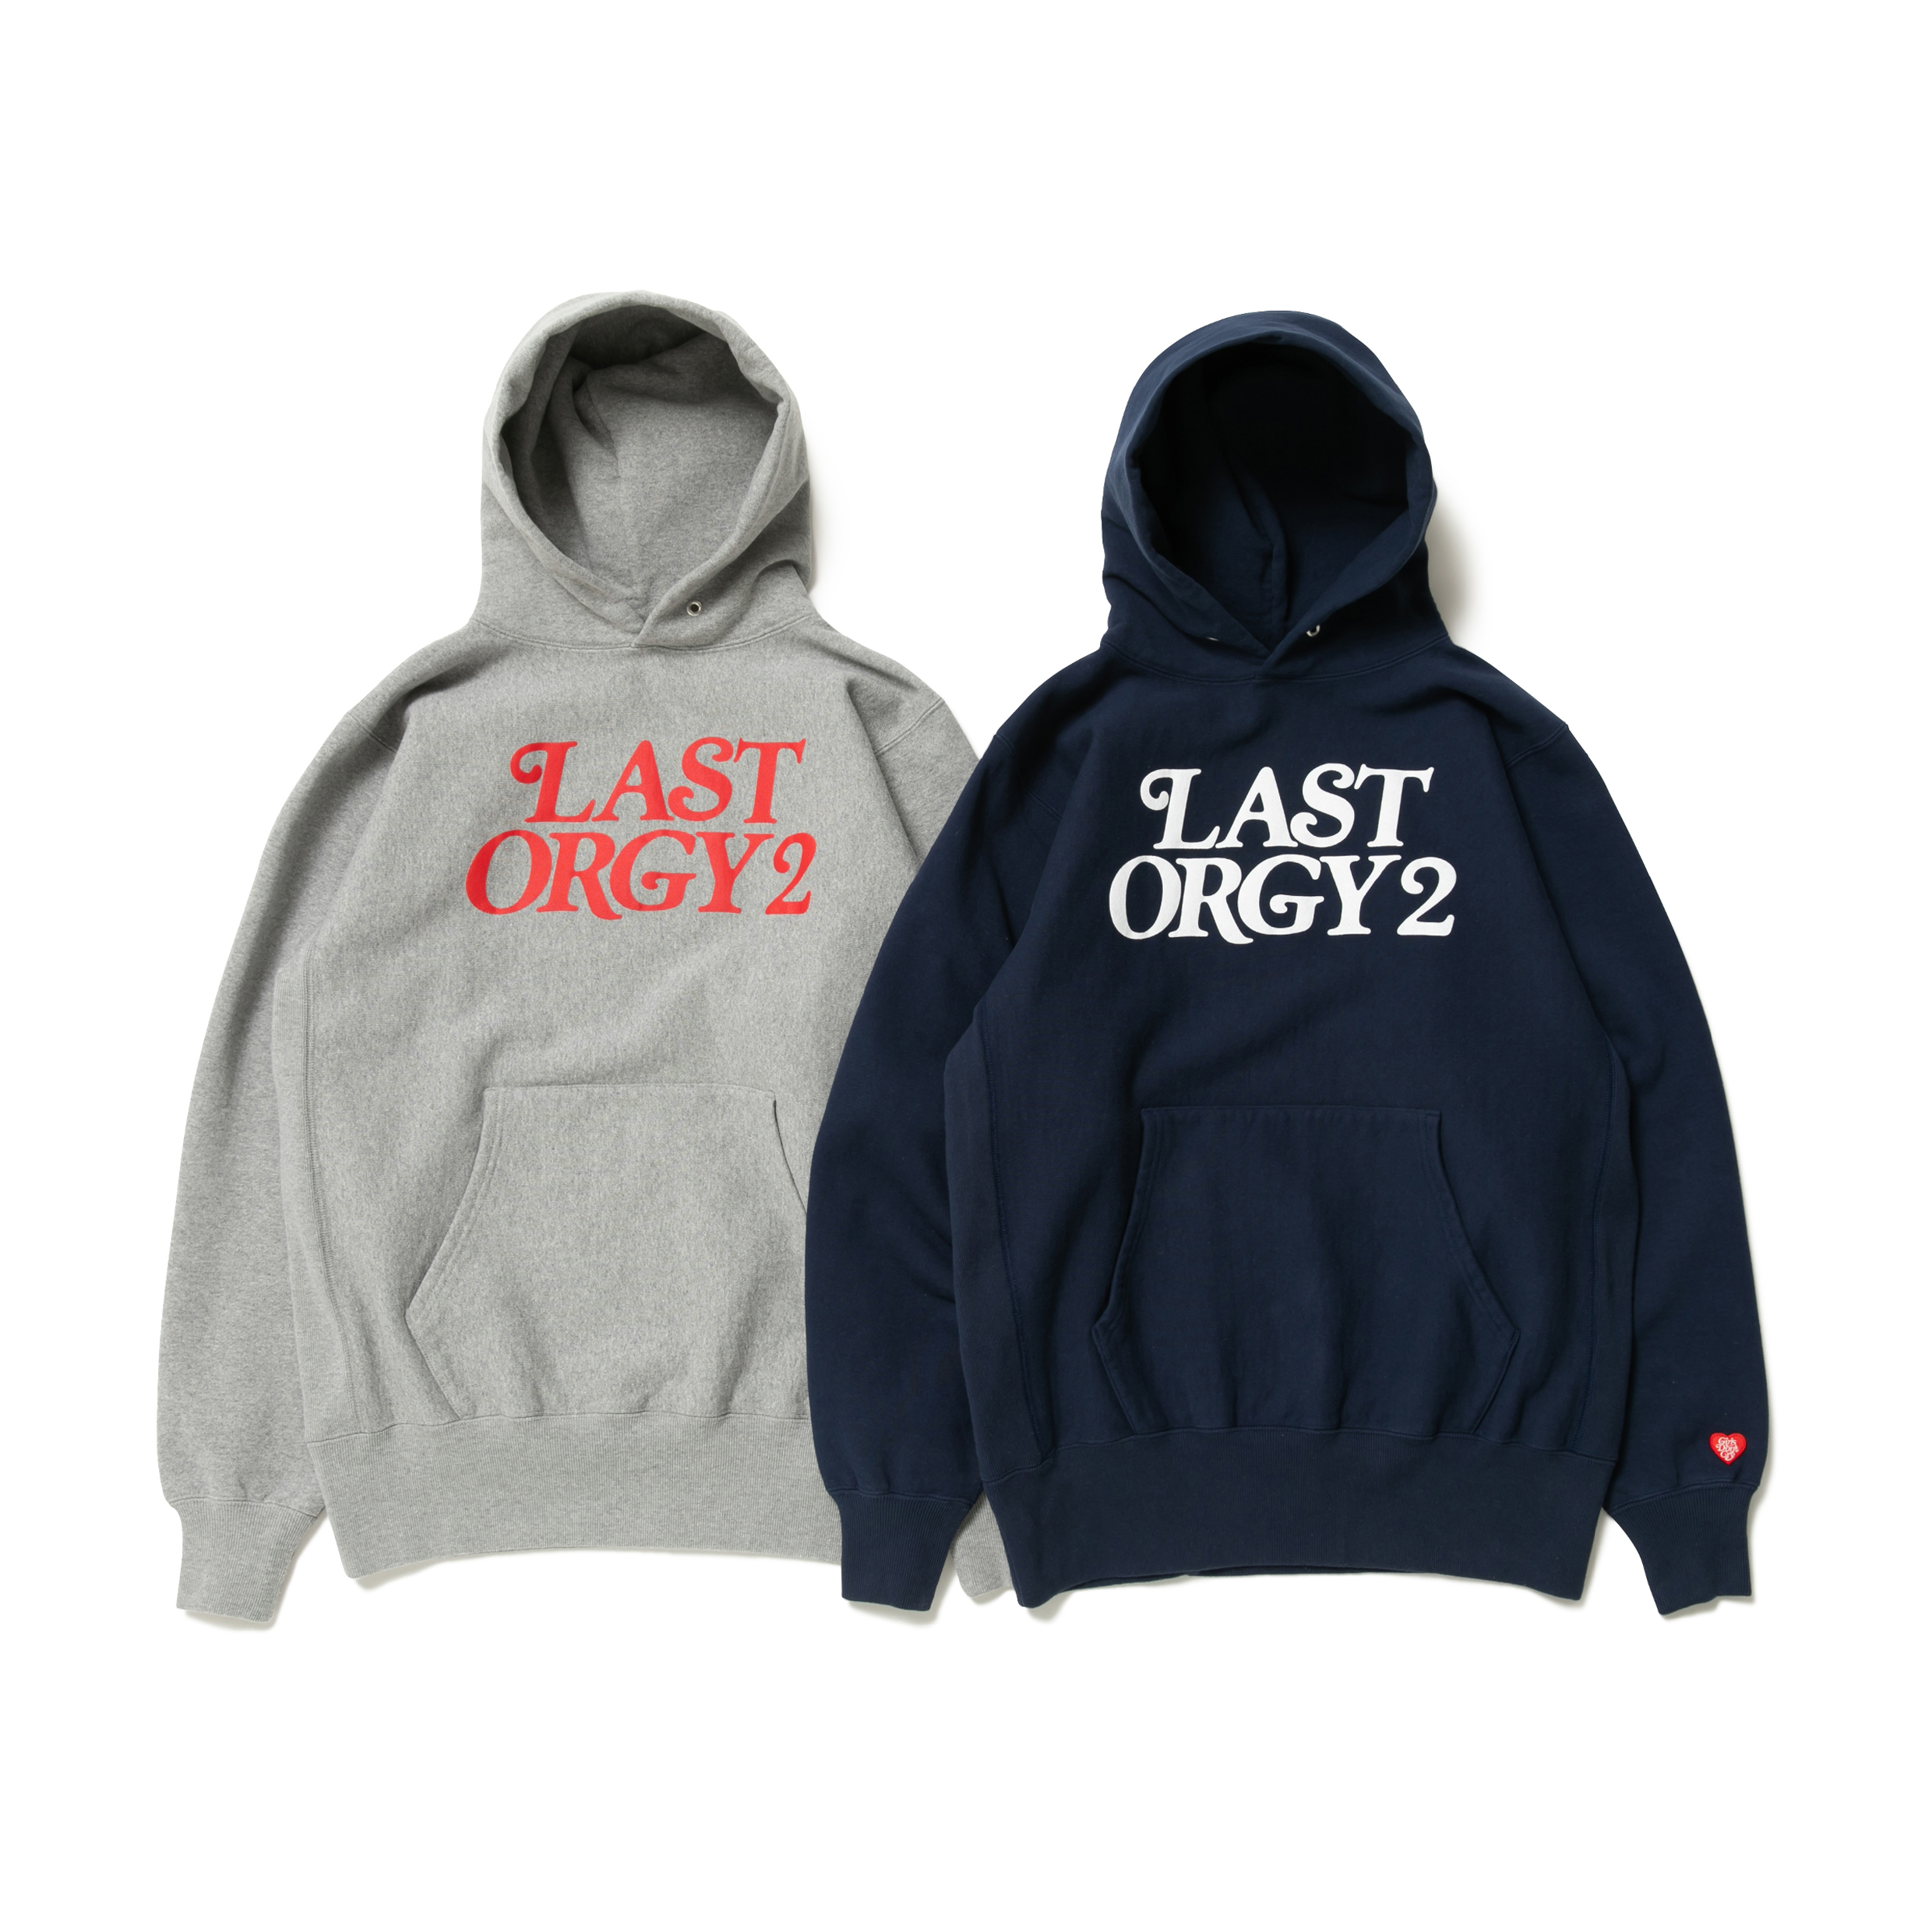 HUMAN MADE x UNDERCOVER “LAST ORGY 2” Collection | NEWS | OTSUMO 